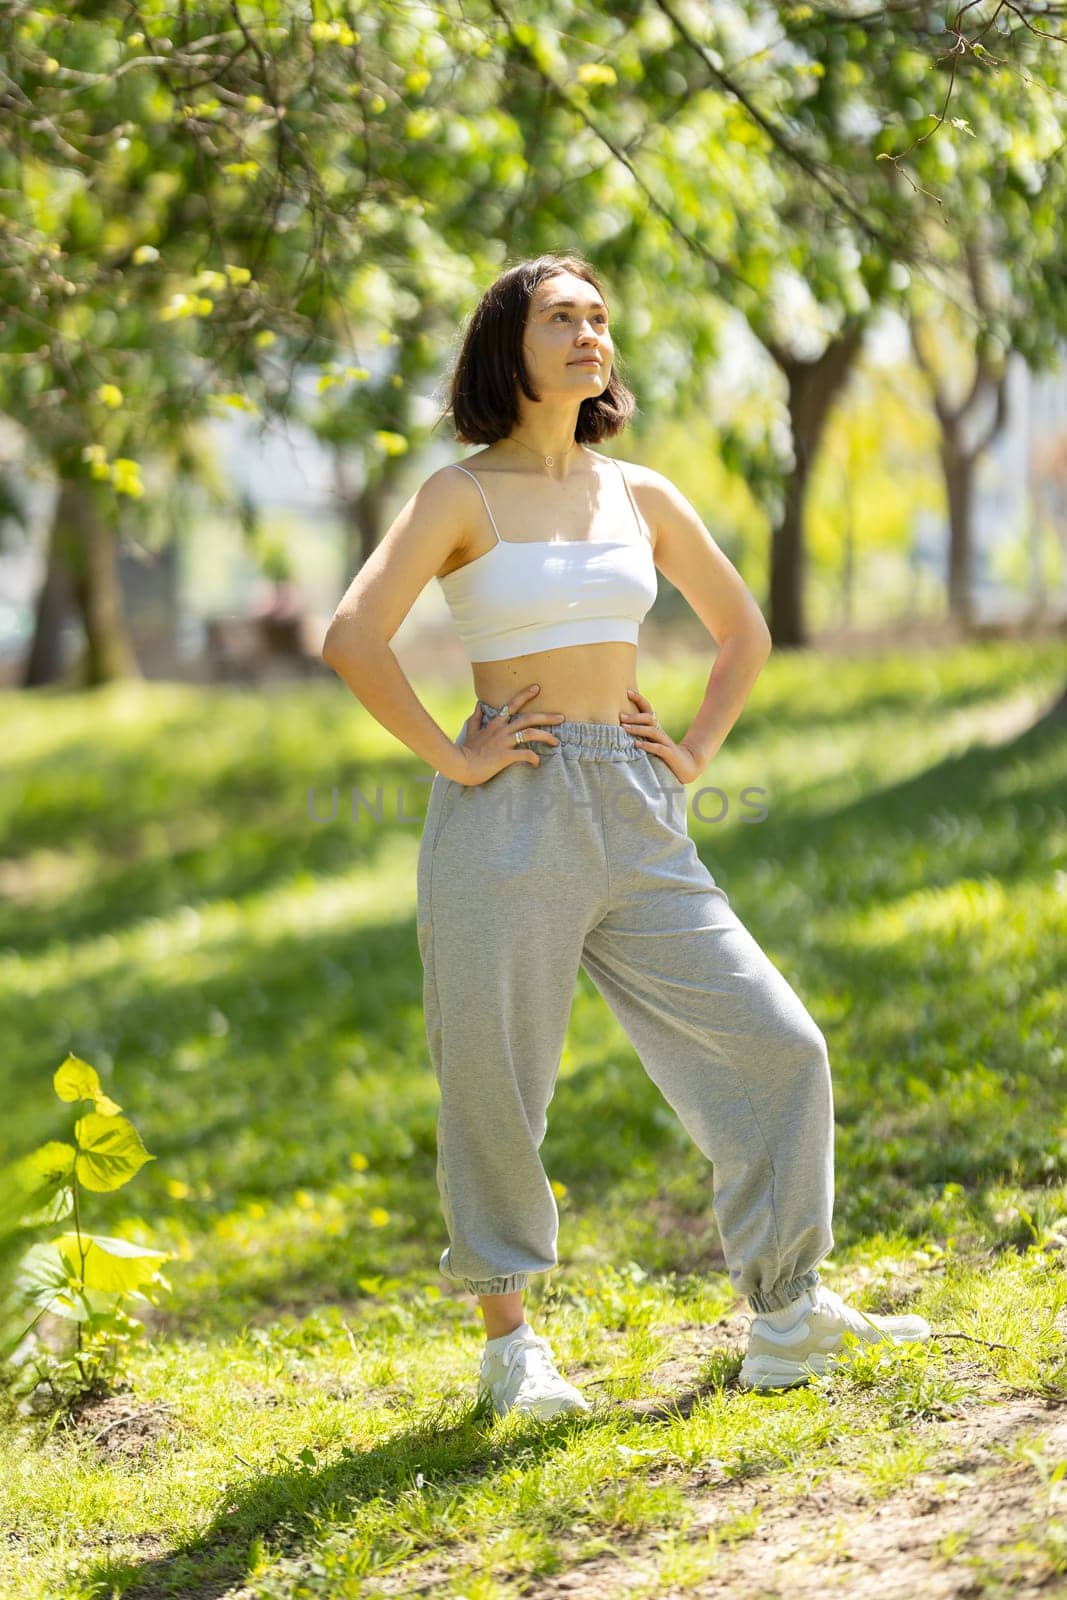 A woman is standing in a park, wearing a white tank top and grey sweatpants by Studia72